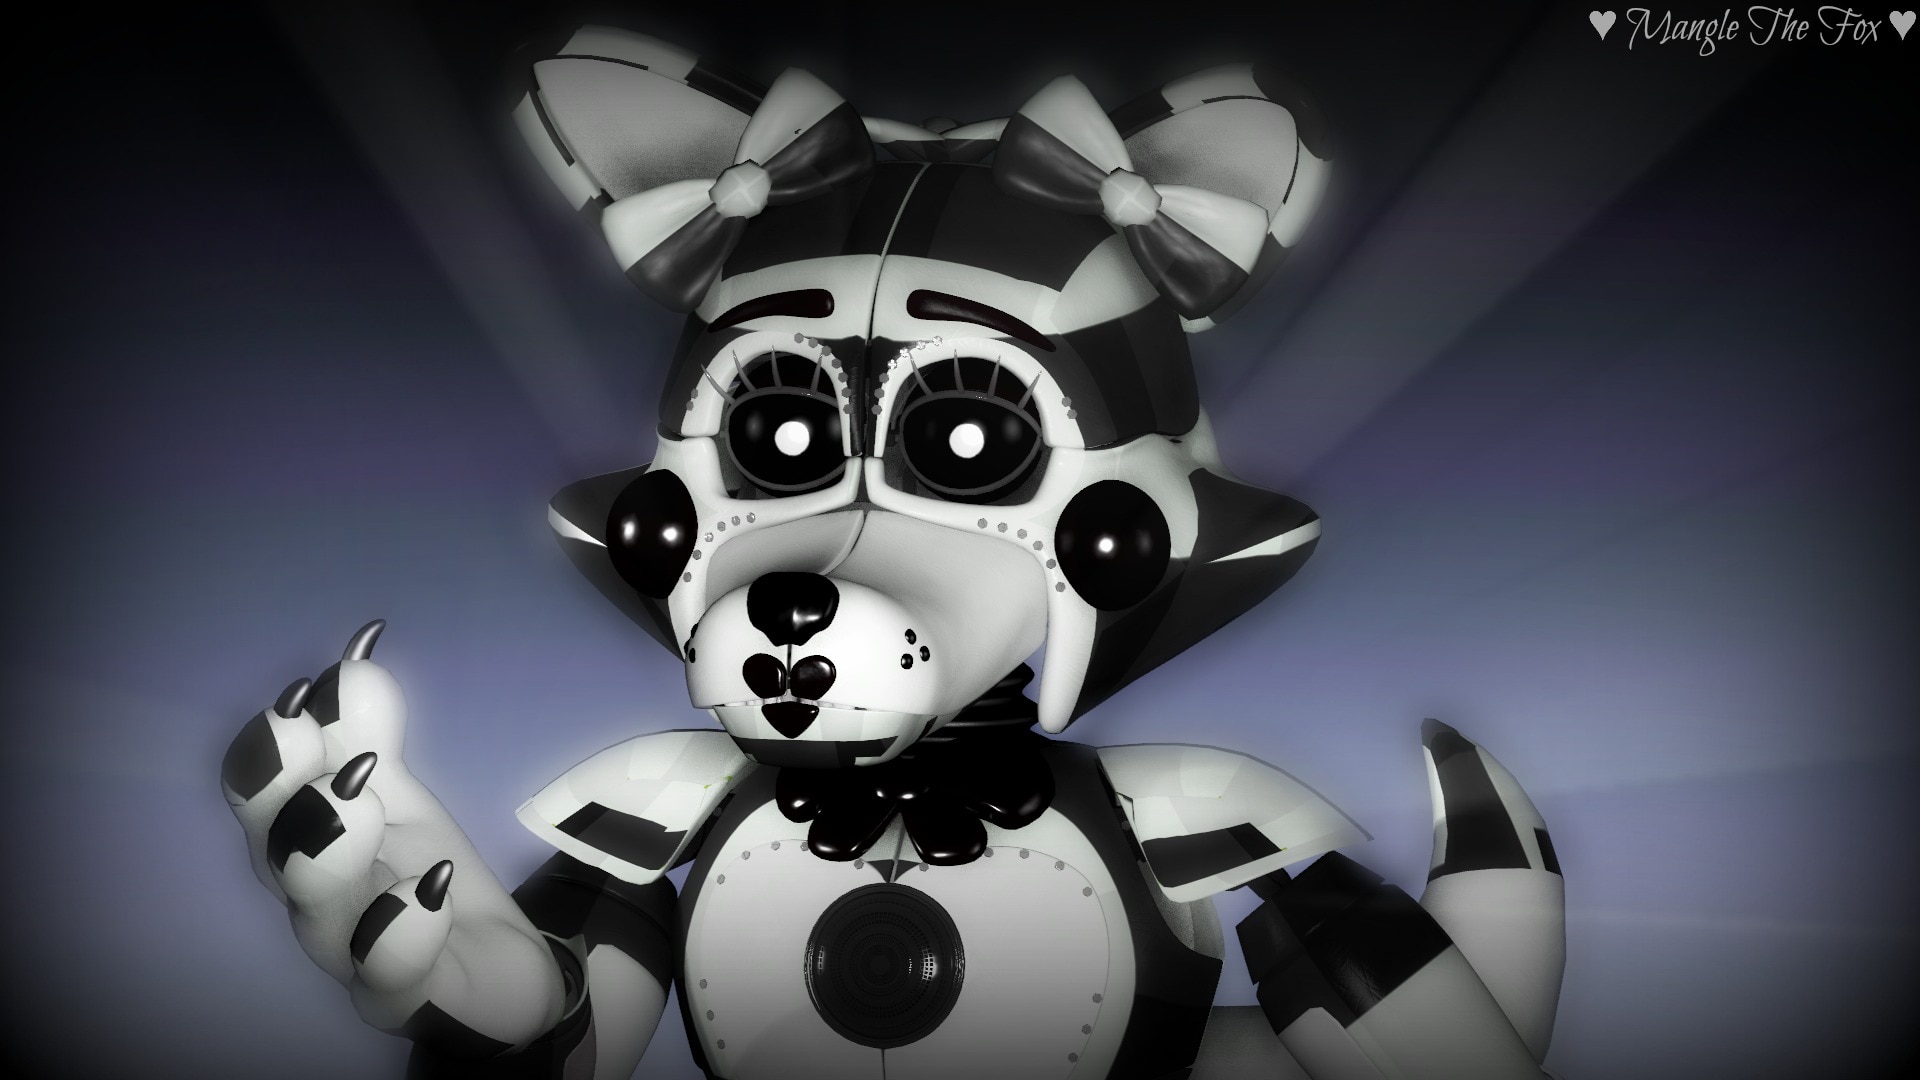 Spoiler Free FNAF Review, Gallery posted by DaijaVu